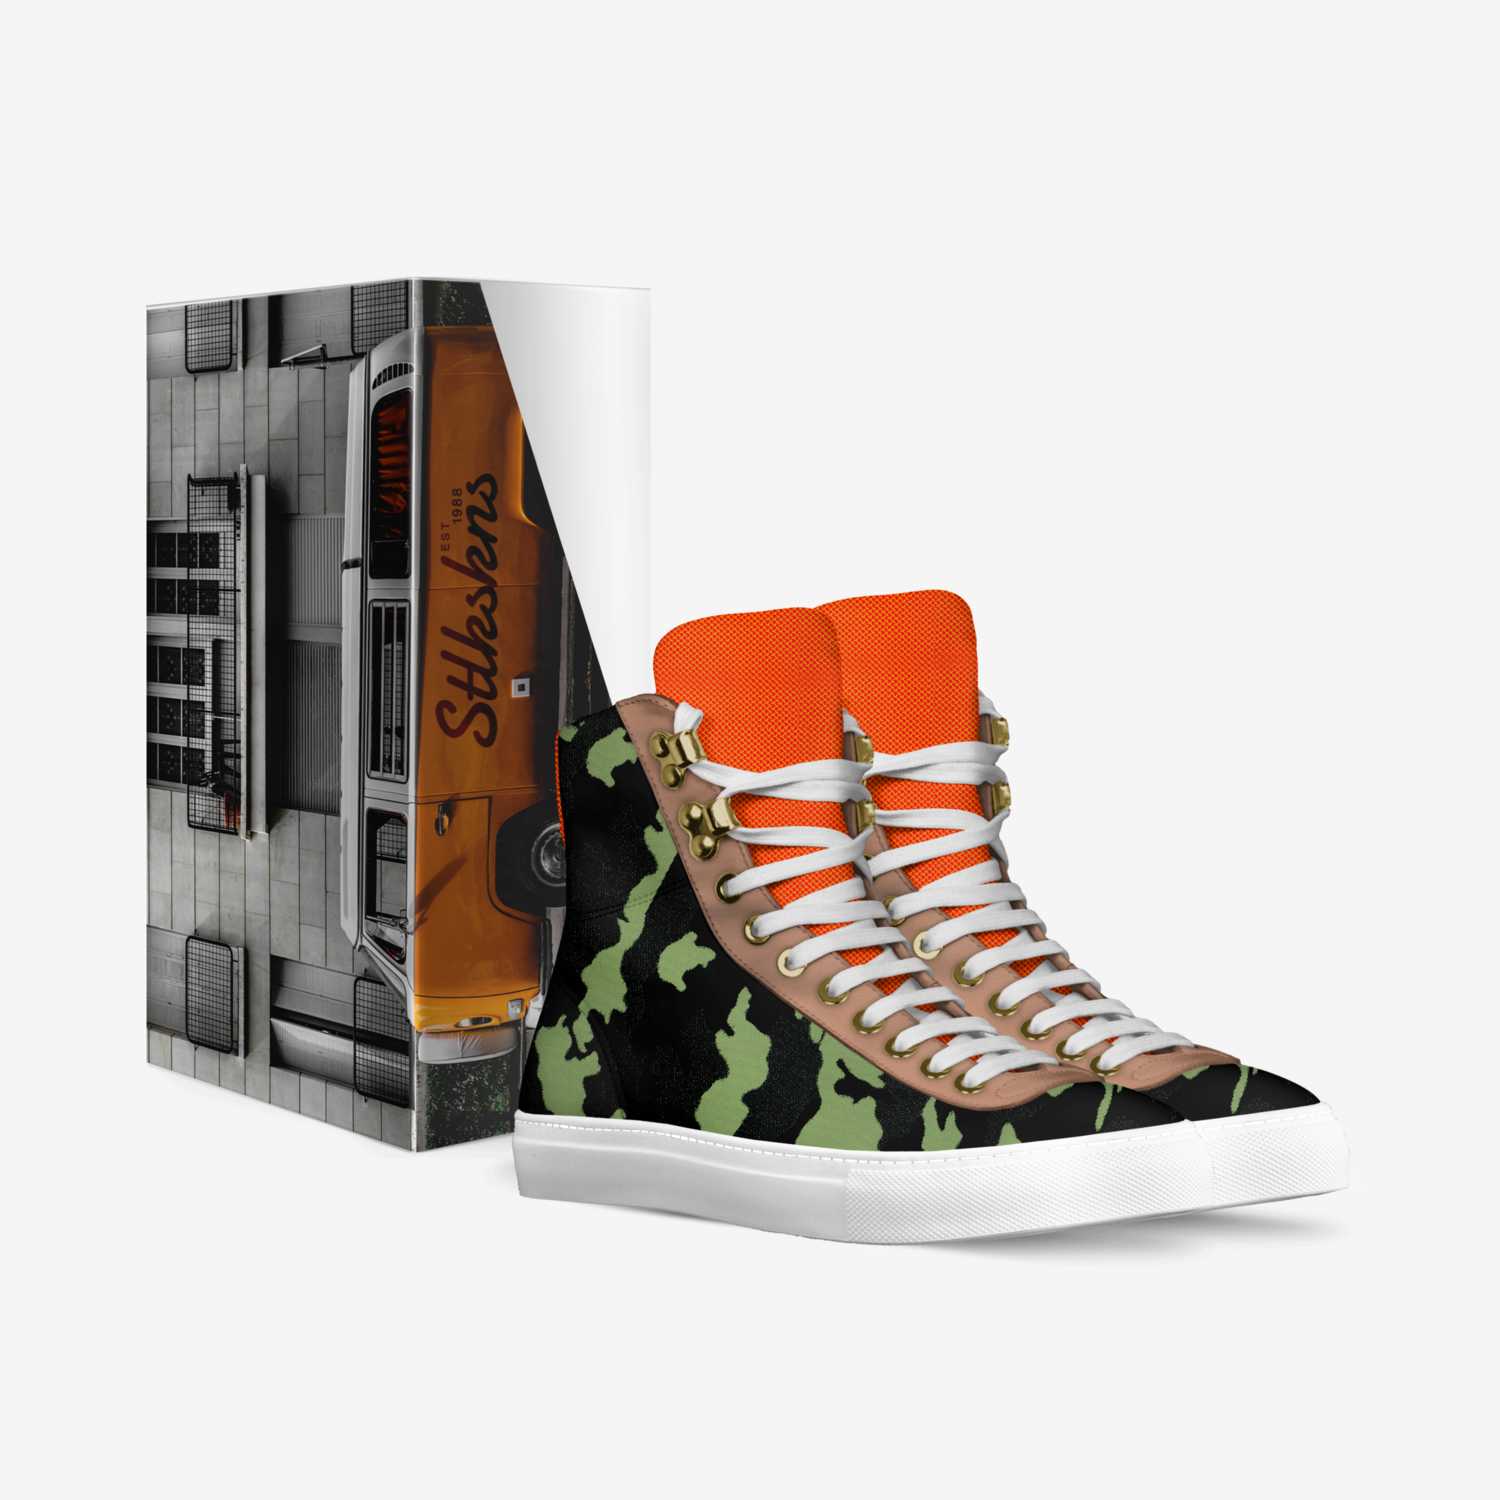 Stlkskns - S425 custom made in Italy shoes by Emeka Ibe | Box view